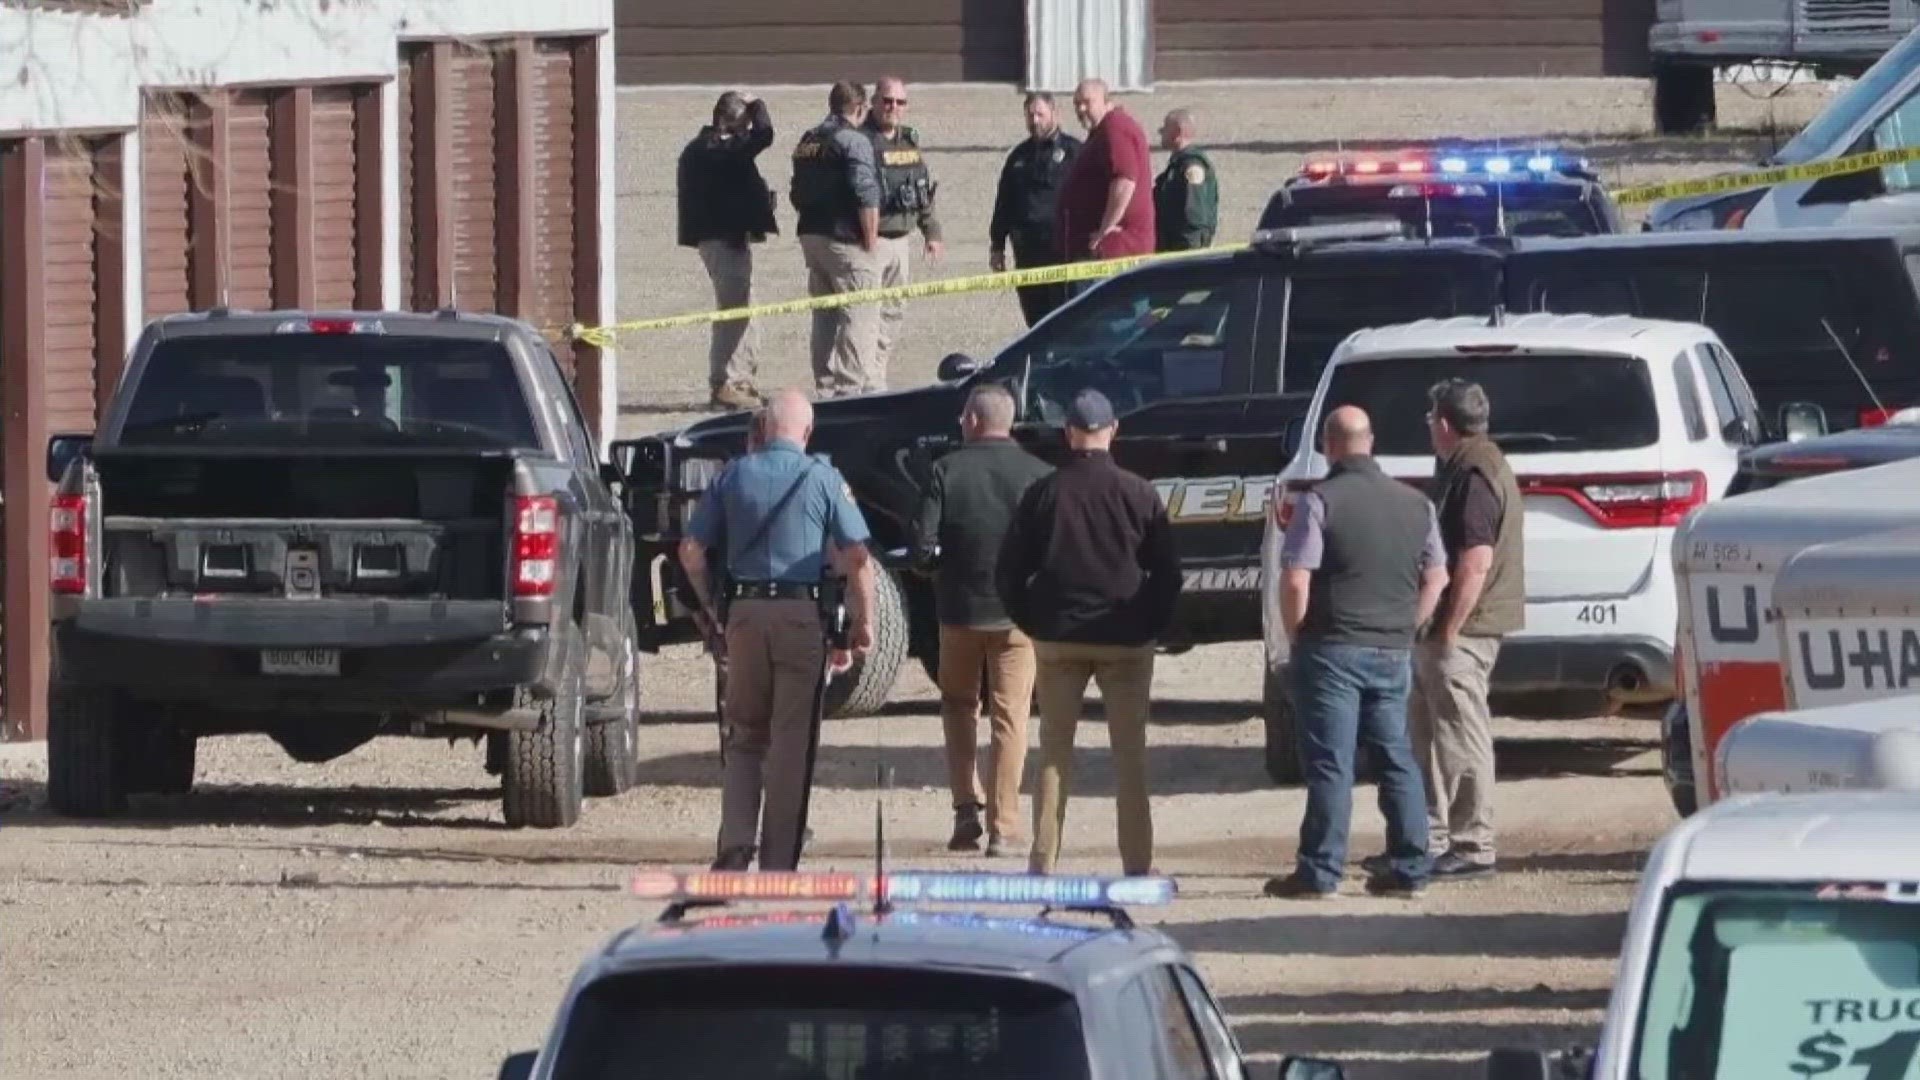 CBI named 44-year-old Jason Campbell from Ogden, Utah as the suspect in Sgt. Michael Moran's shooting death on Wednesday in the southwest Colorado town.